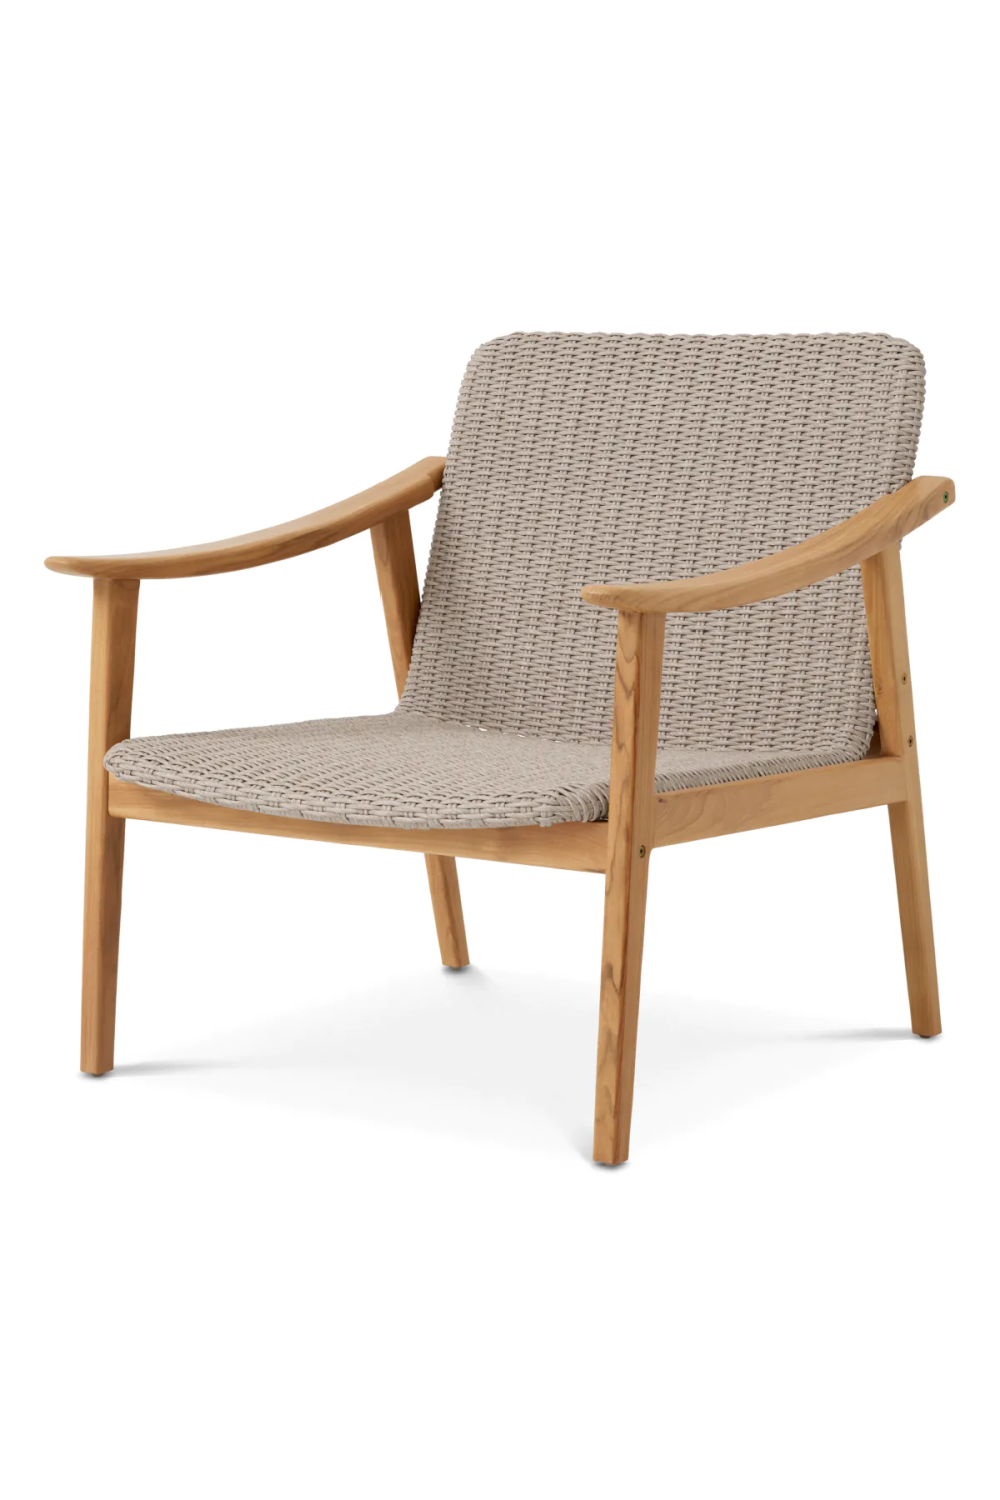 Taupe Weave Outdoor Lounge Chair | Eichholtz Honolulu | Oroa.com